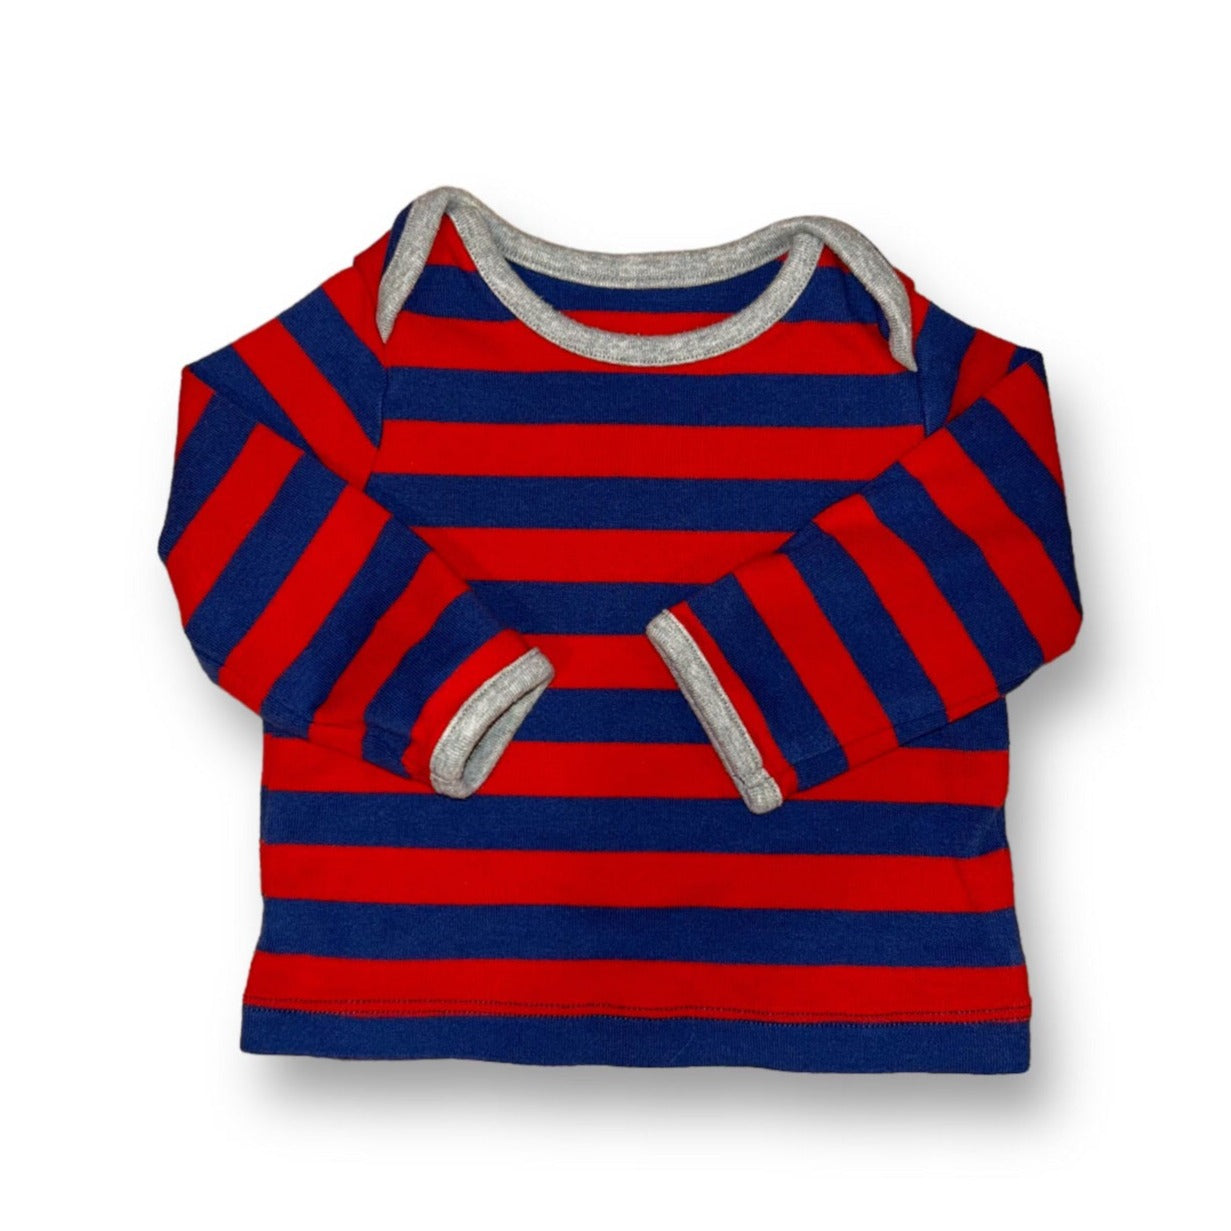 Boys Baby Boden Size 3-6 Months Red &amp; Blue Stripes Long Sleeve Top